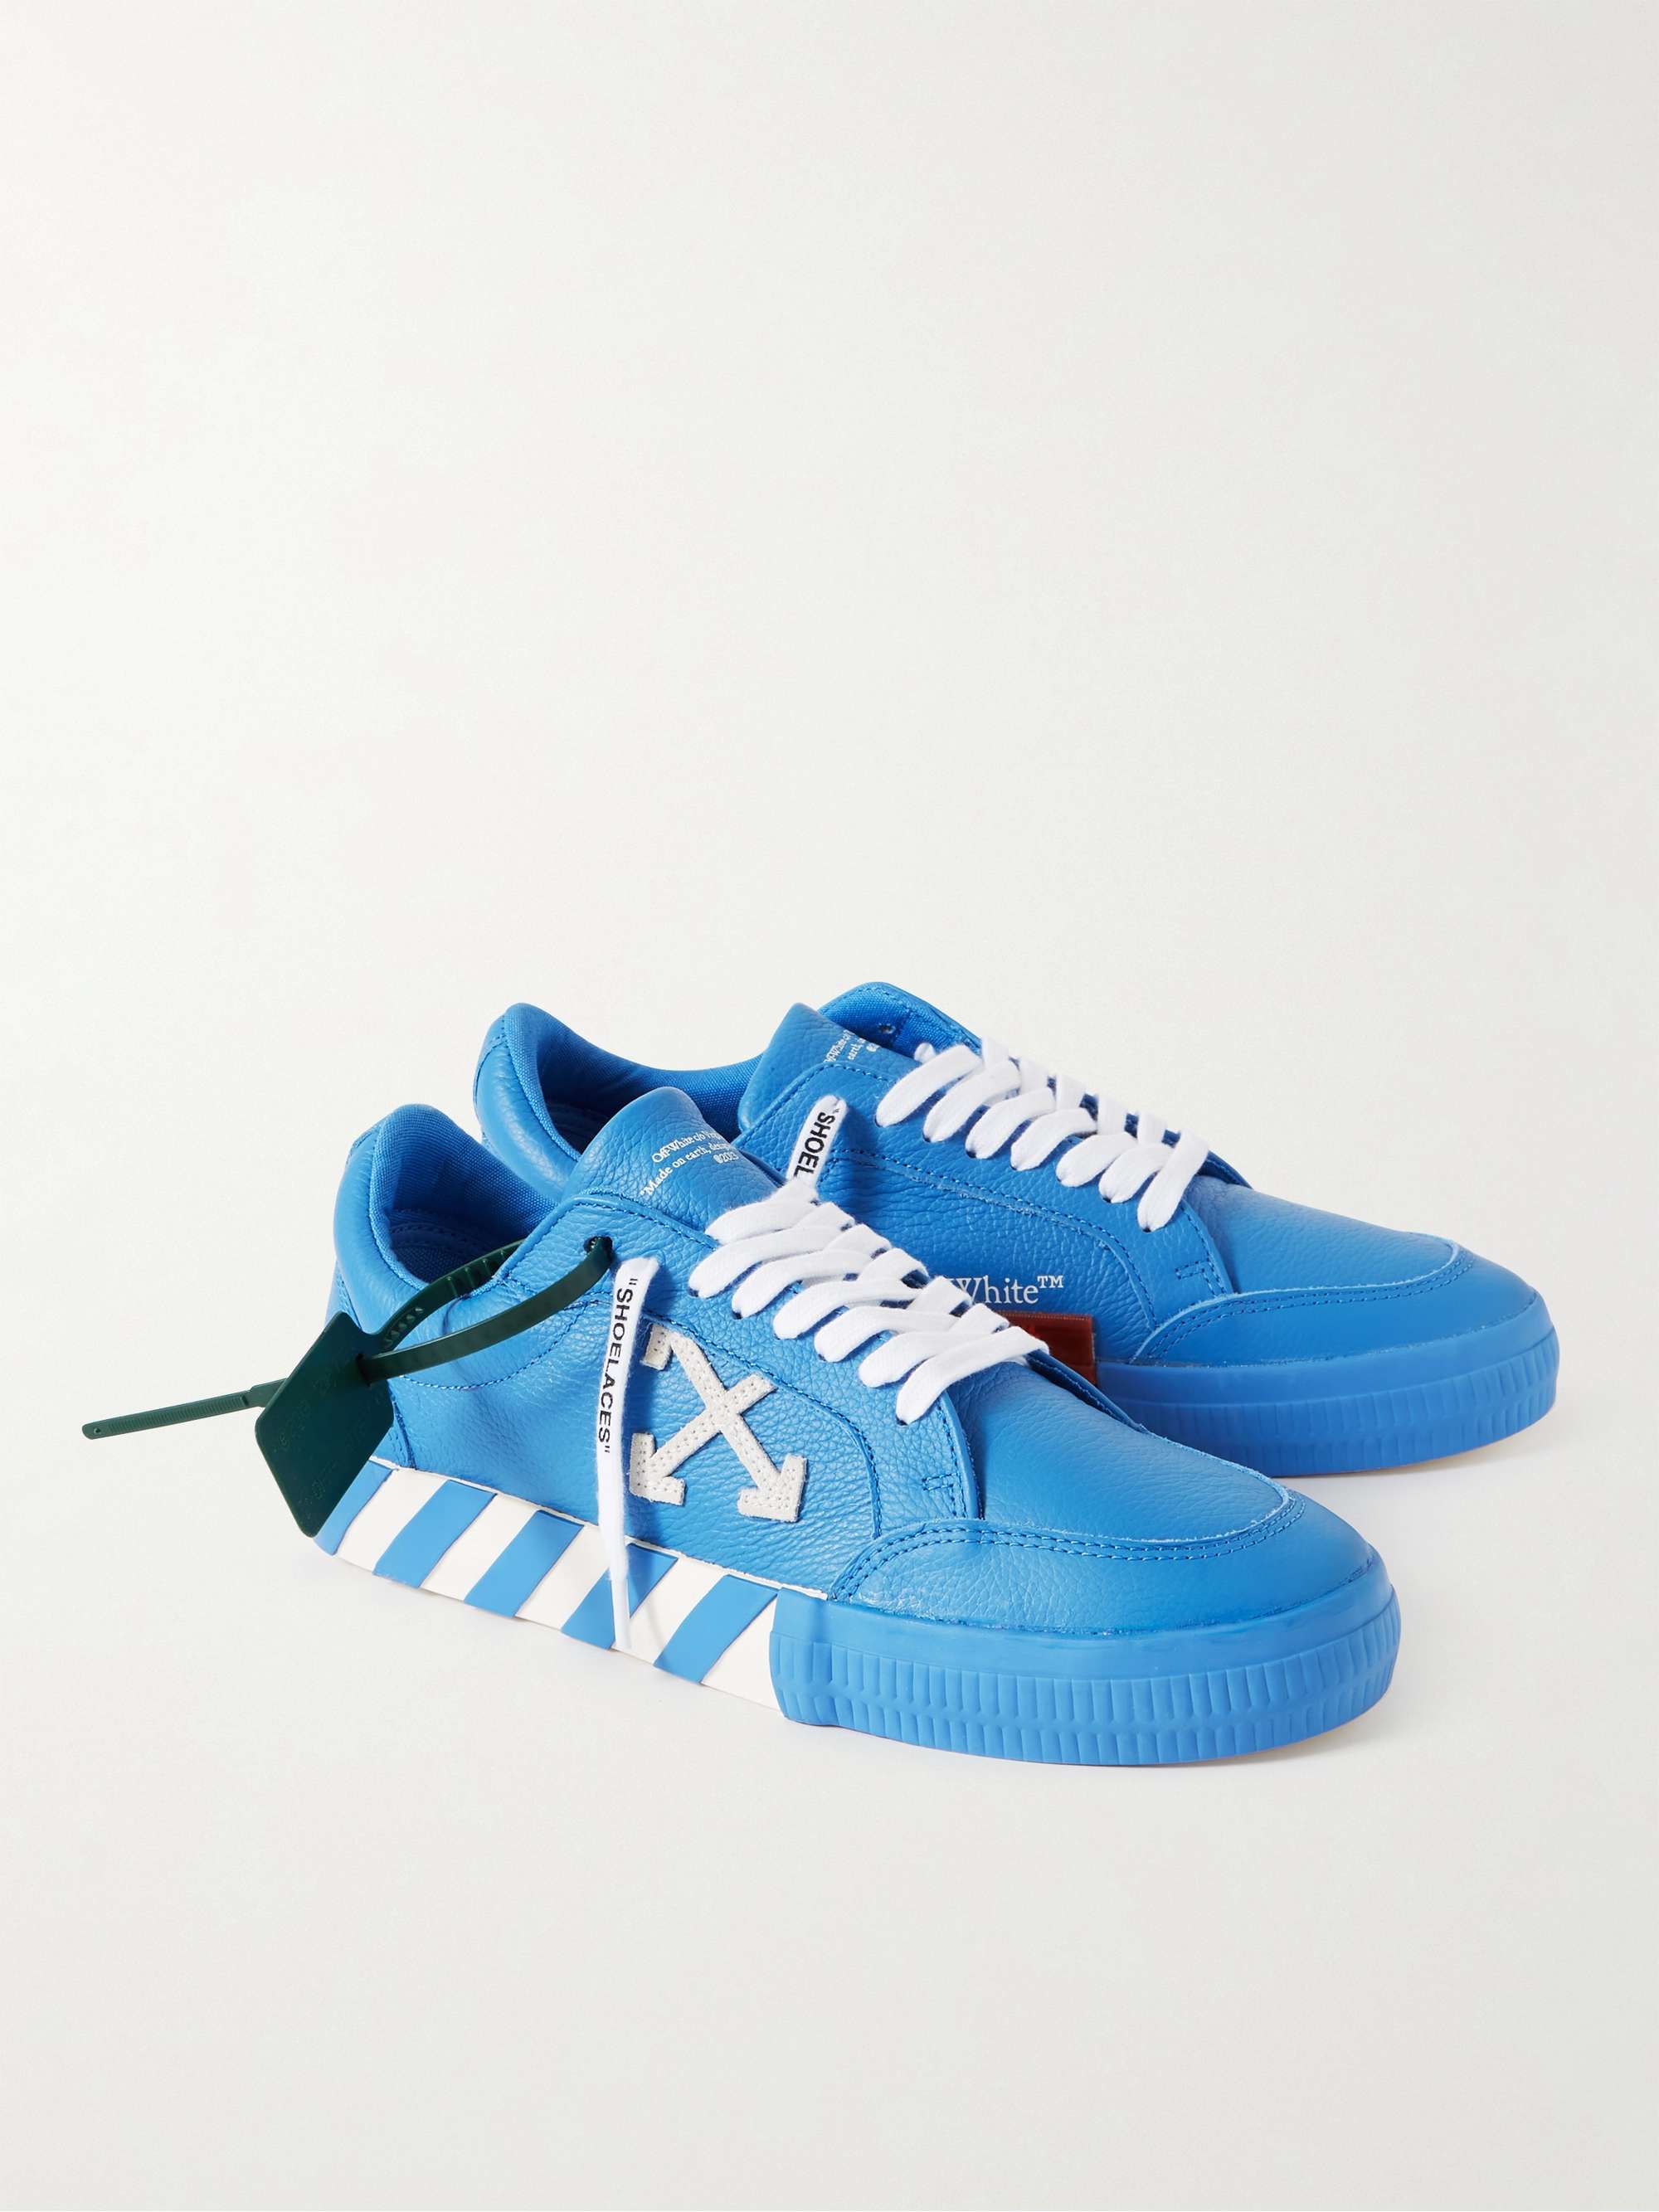 OFF-WHITE Low Vulcanized Suede-Trimmed Full-Grain Leather Sneakers